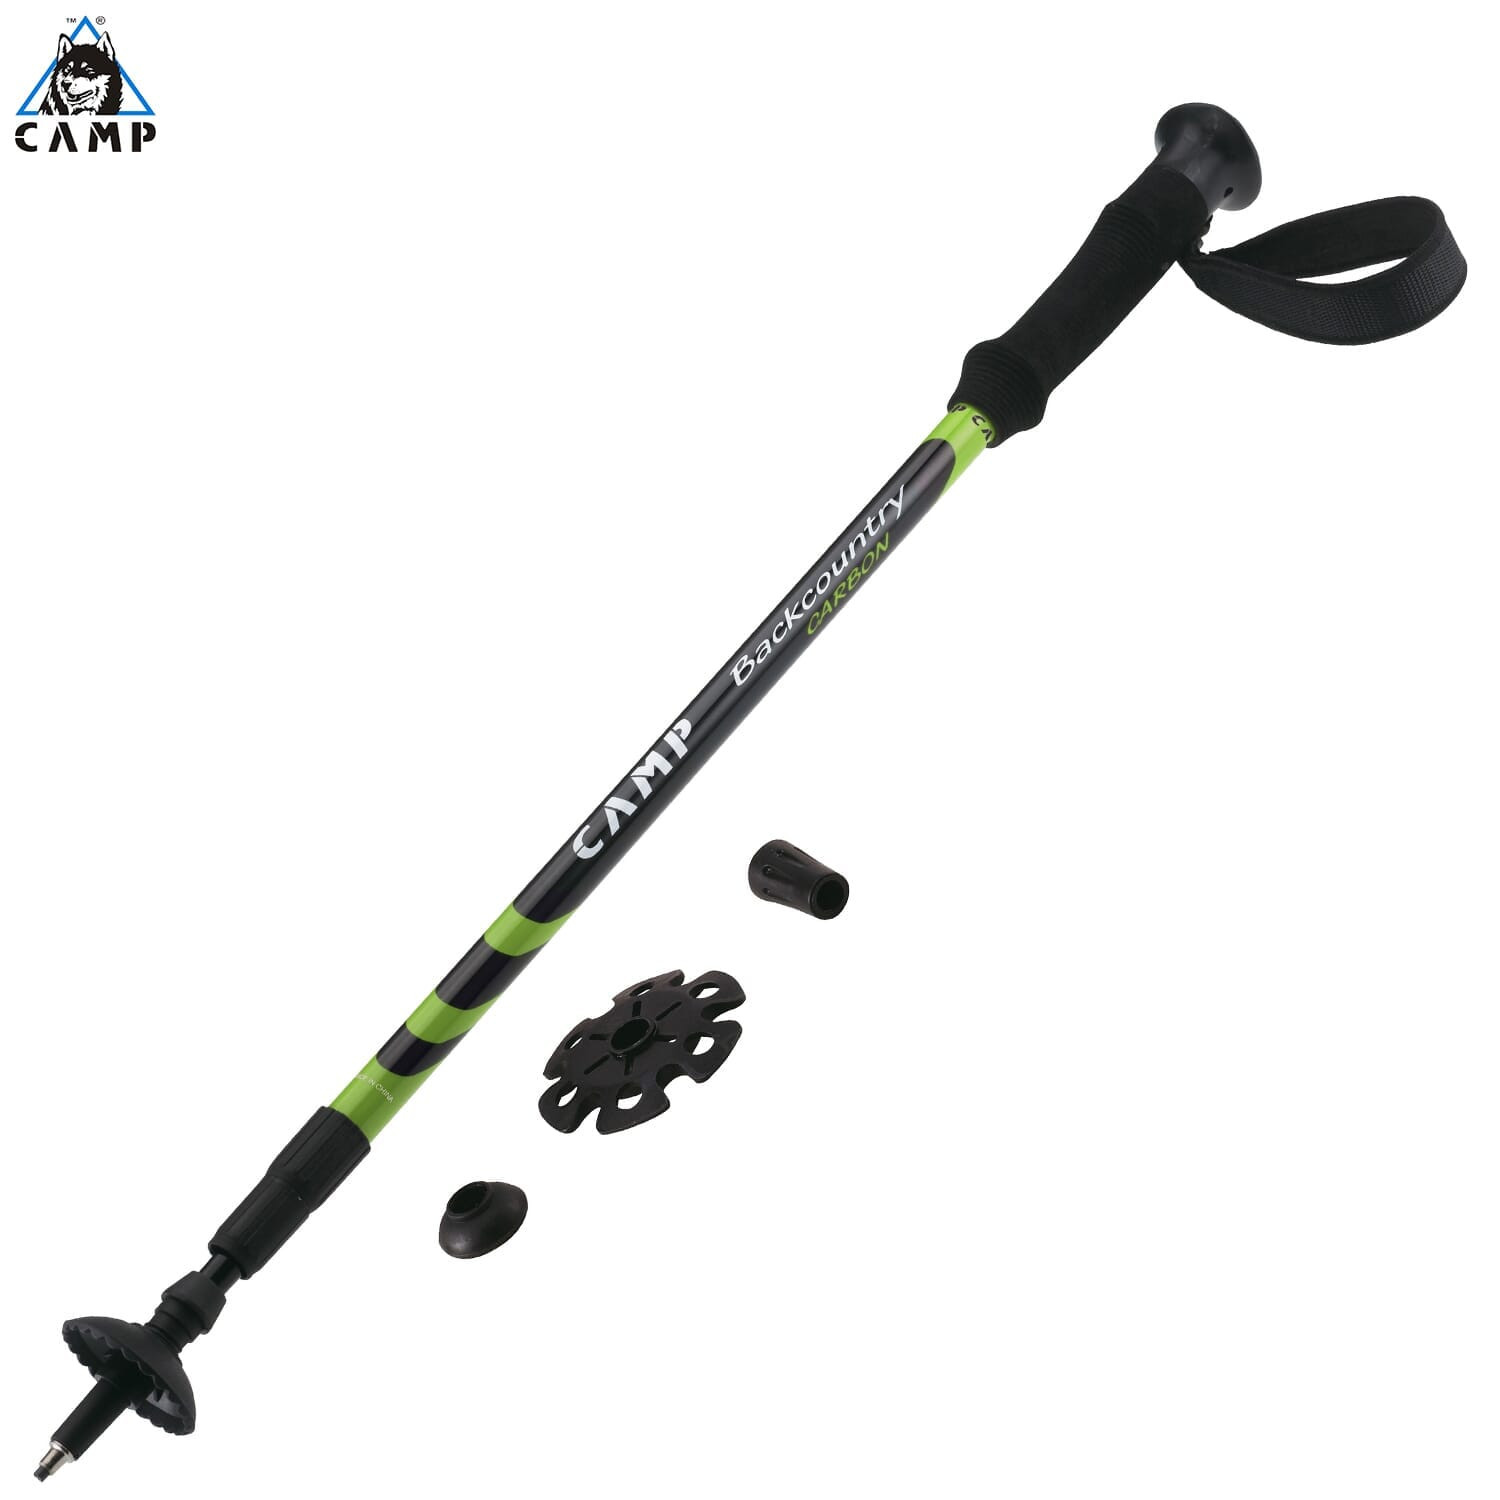 Camp Backcountry Carbon Pole for Trekking Hiking and Backpacking (Per Piece)